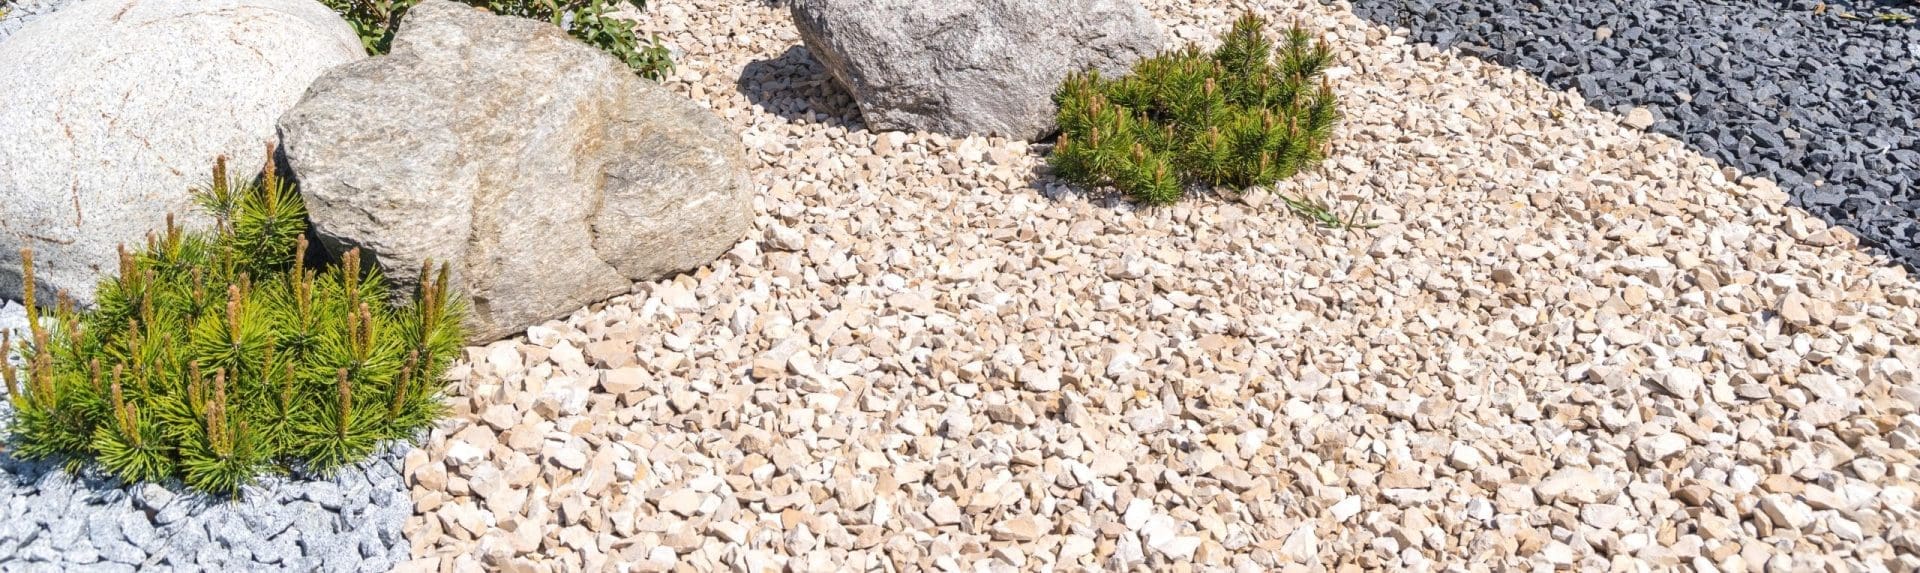 Using Stones and Pebbles to Improve Your Garden's Appearance.